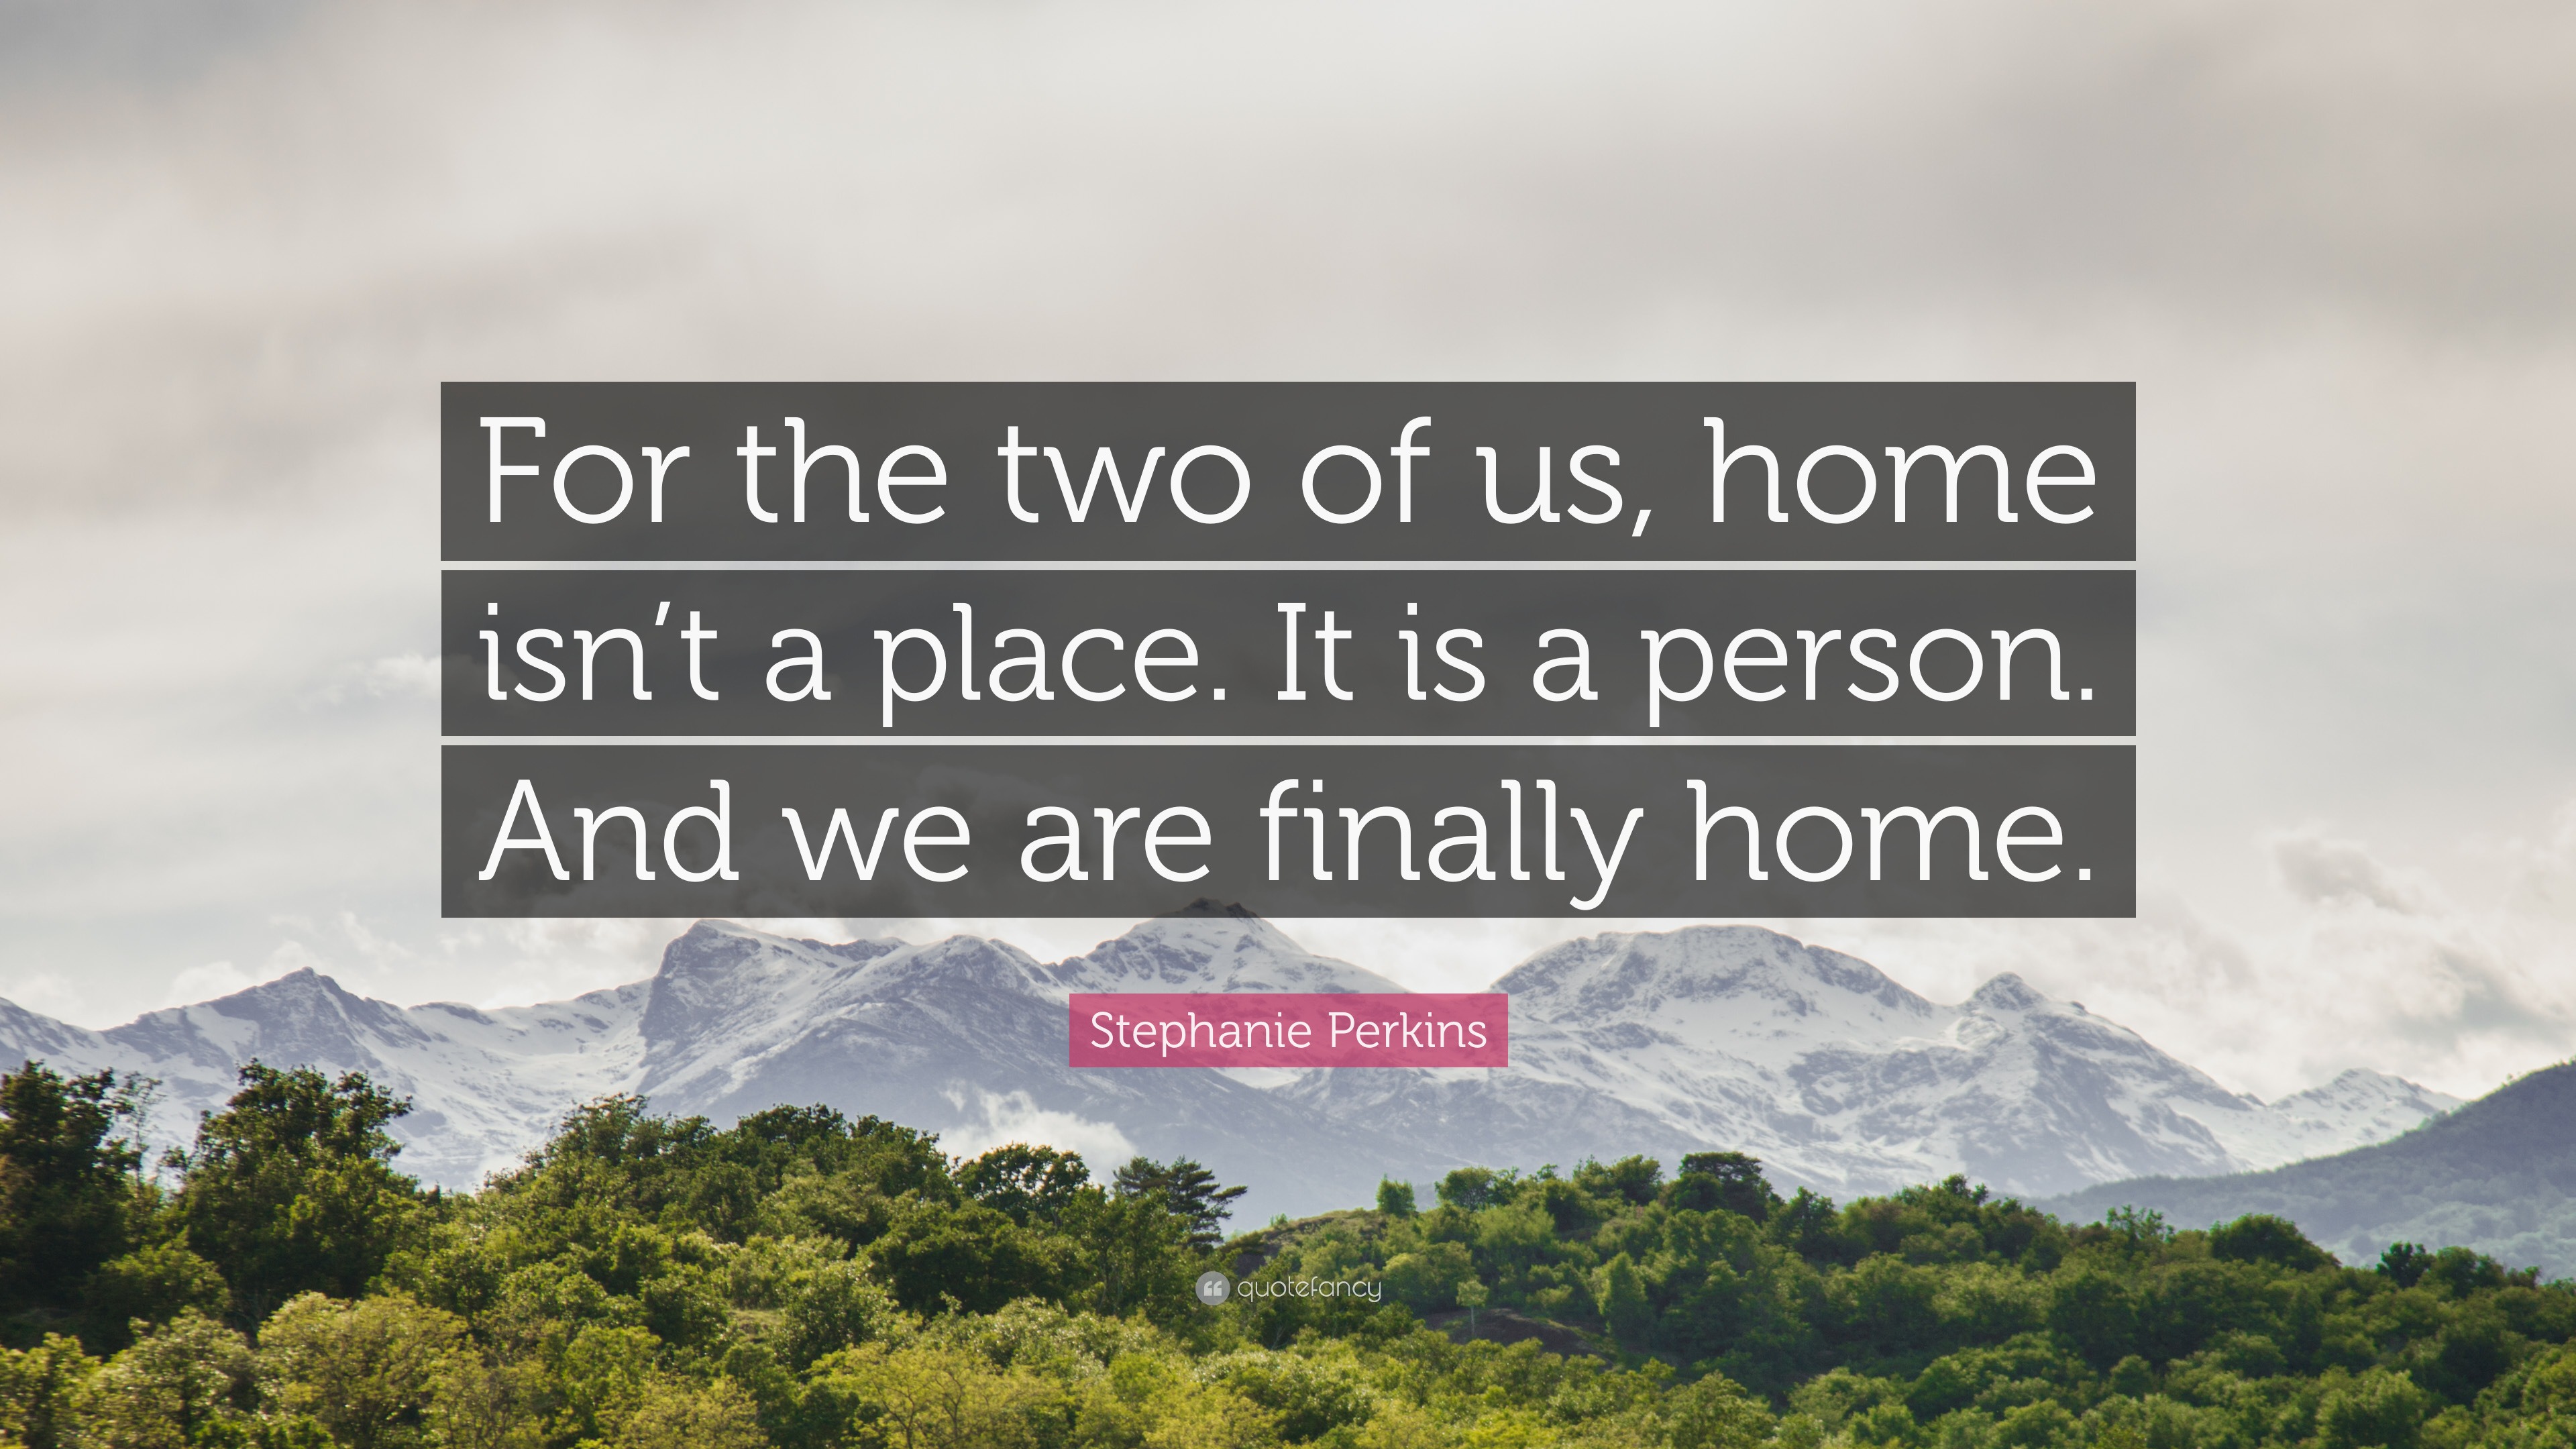 For the two of us, home isn't a place. It is a person. And we are finally  home